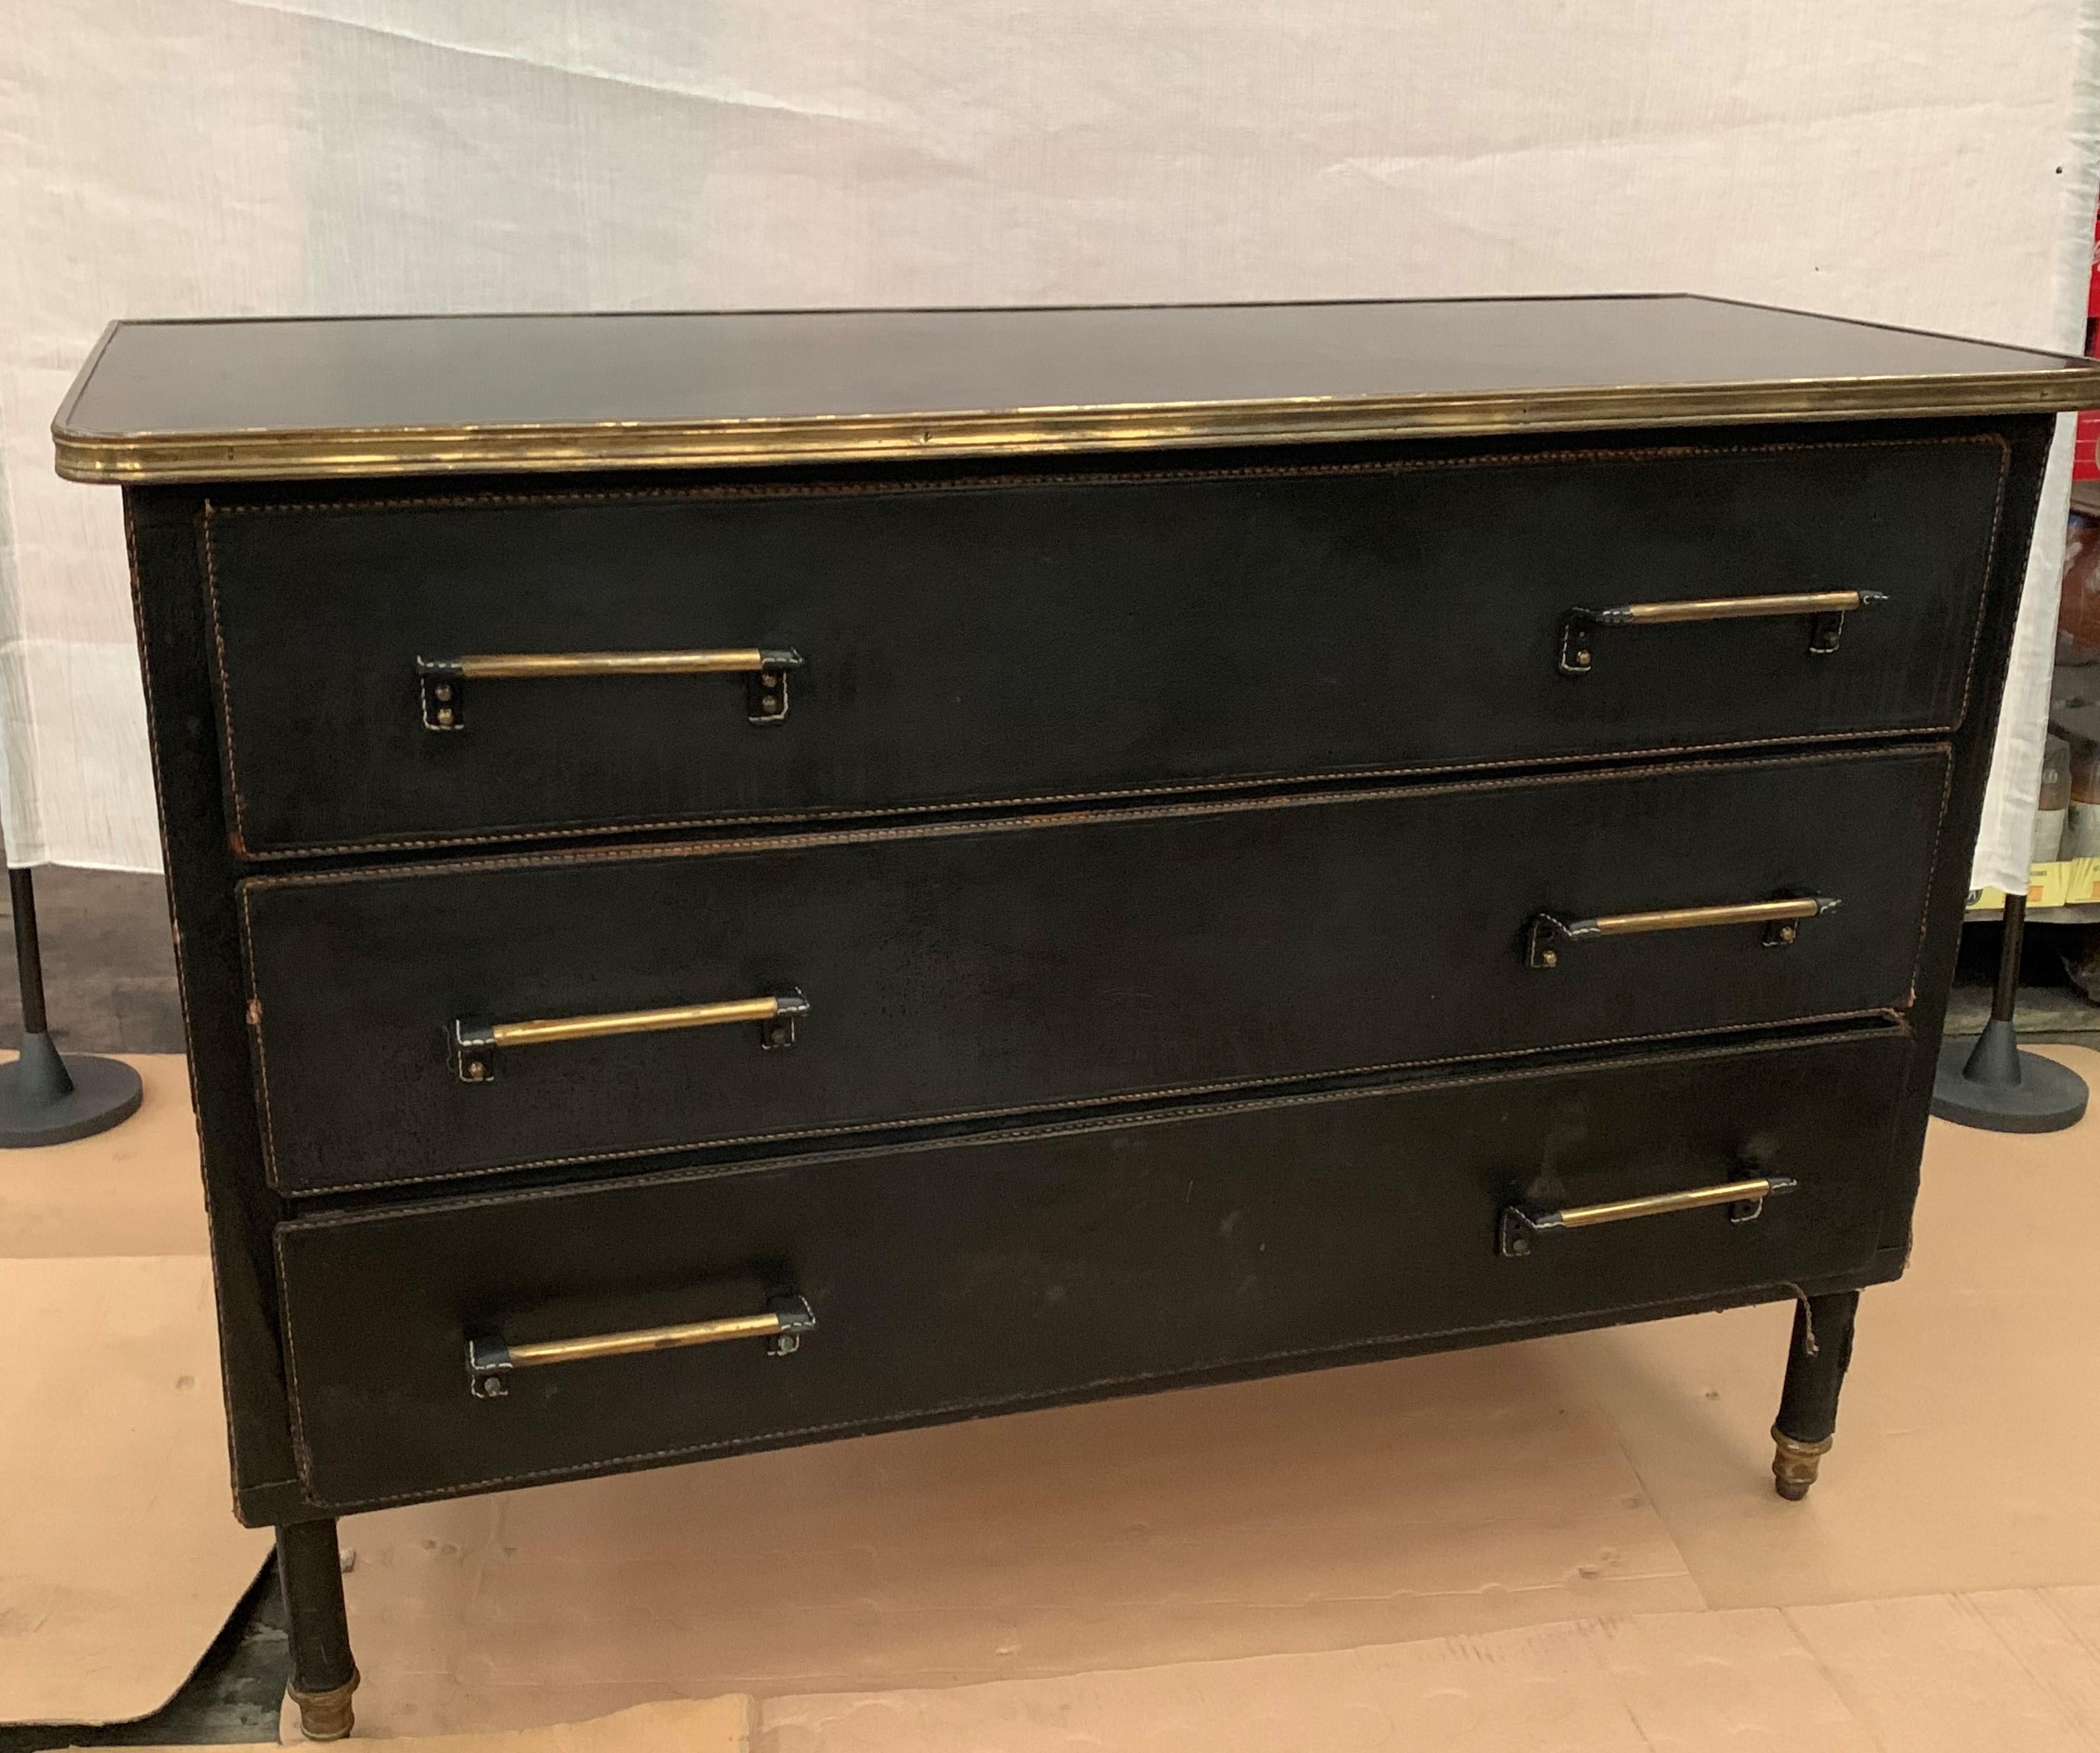 Very rare black stitched leather commode designed by Jacques Adnet in France in 1950s. A large model, built on a structure in oak and saddle stitched leather wrapped on 3 sides. It has 3 large drawers with double handles in brass on the front. It is